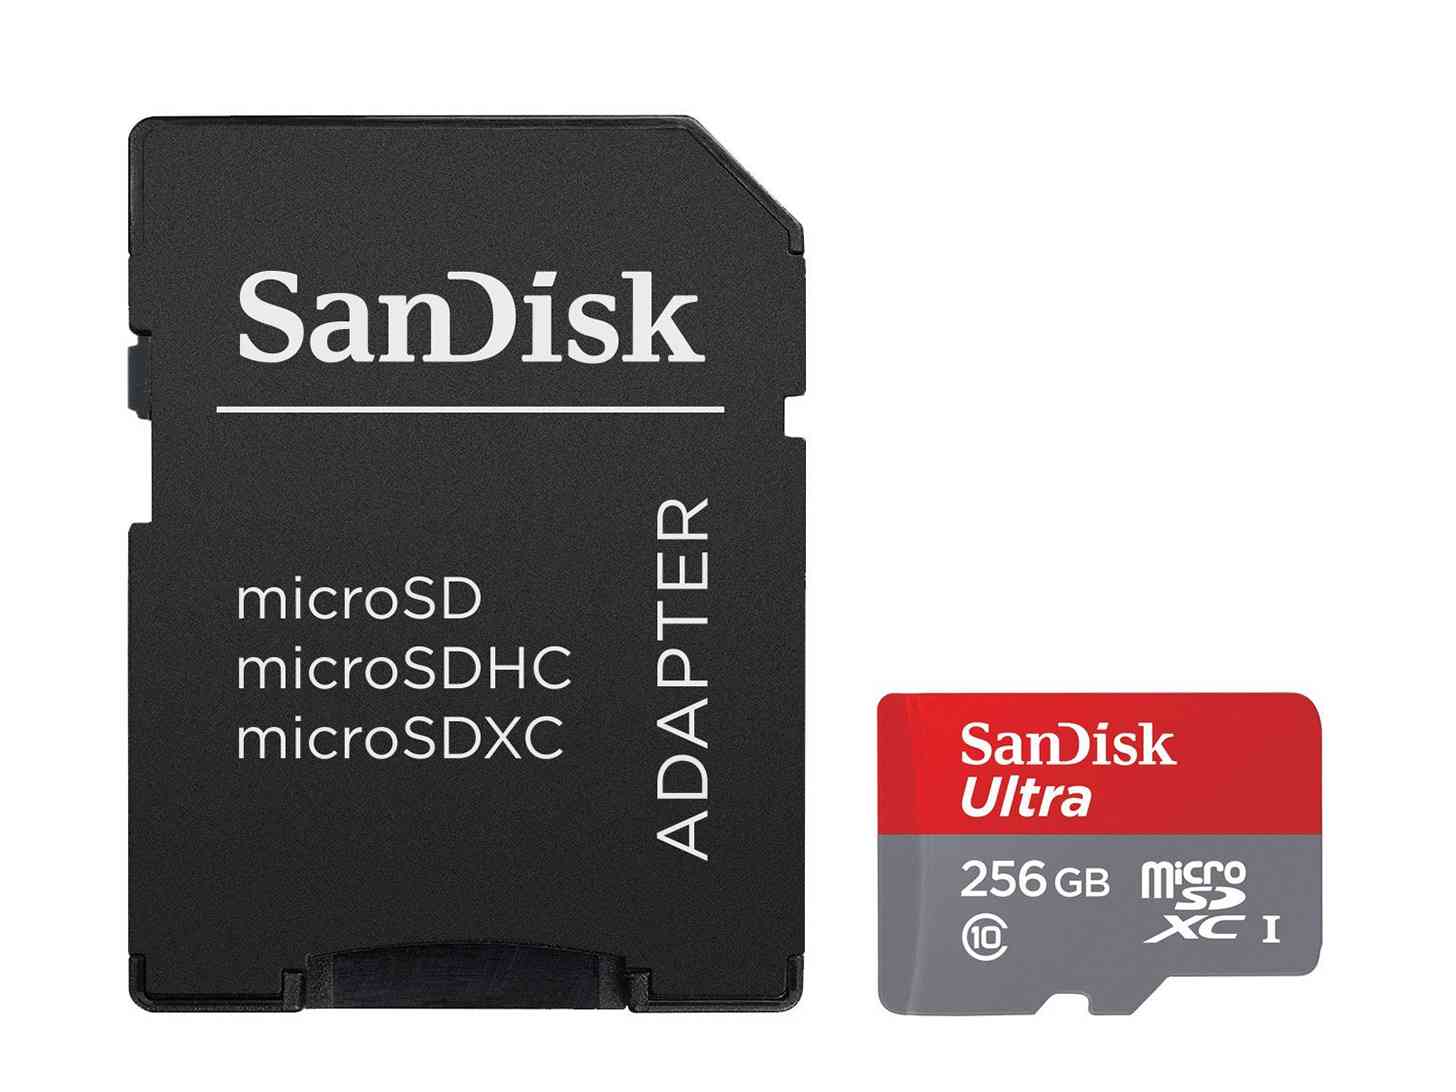 SanDisk 256GB microSD card adapter official